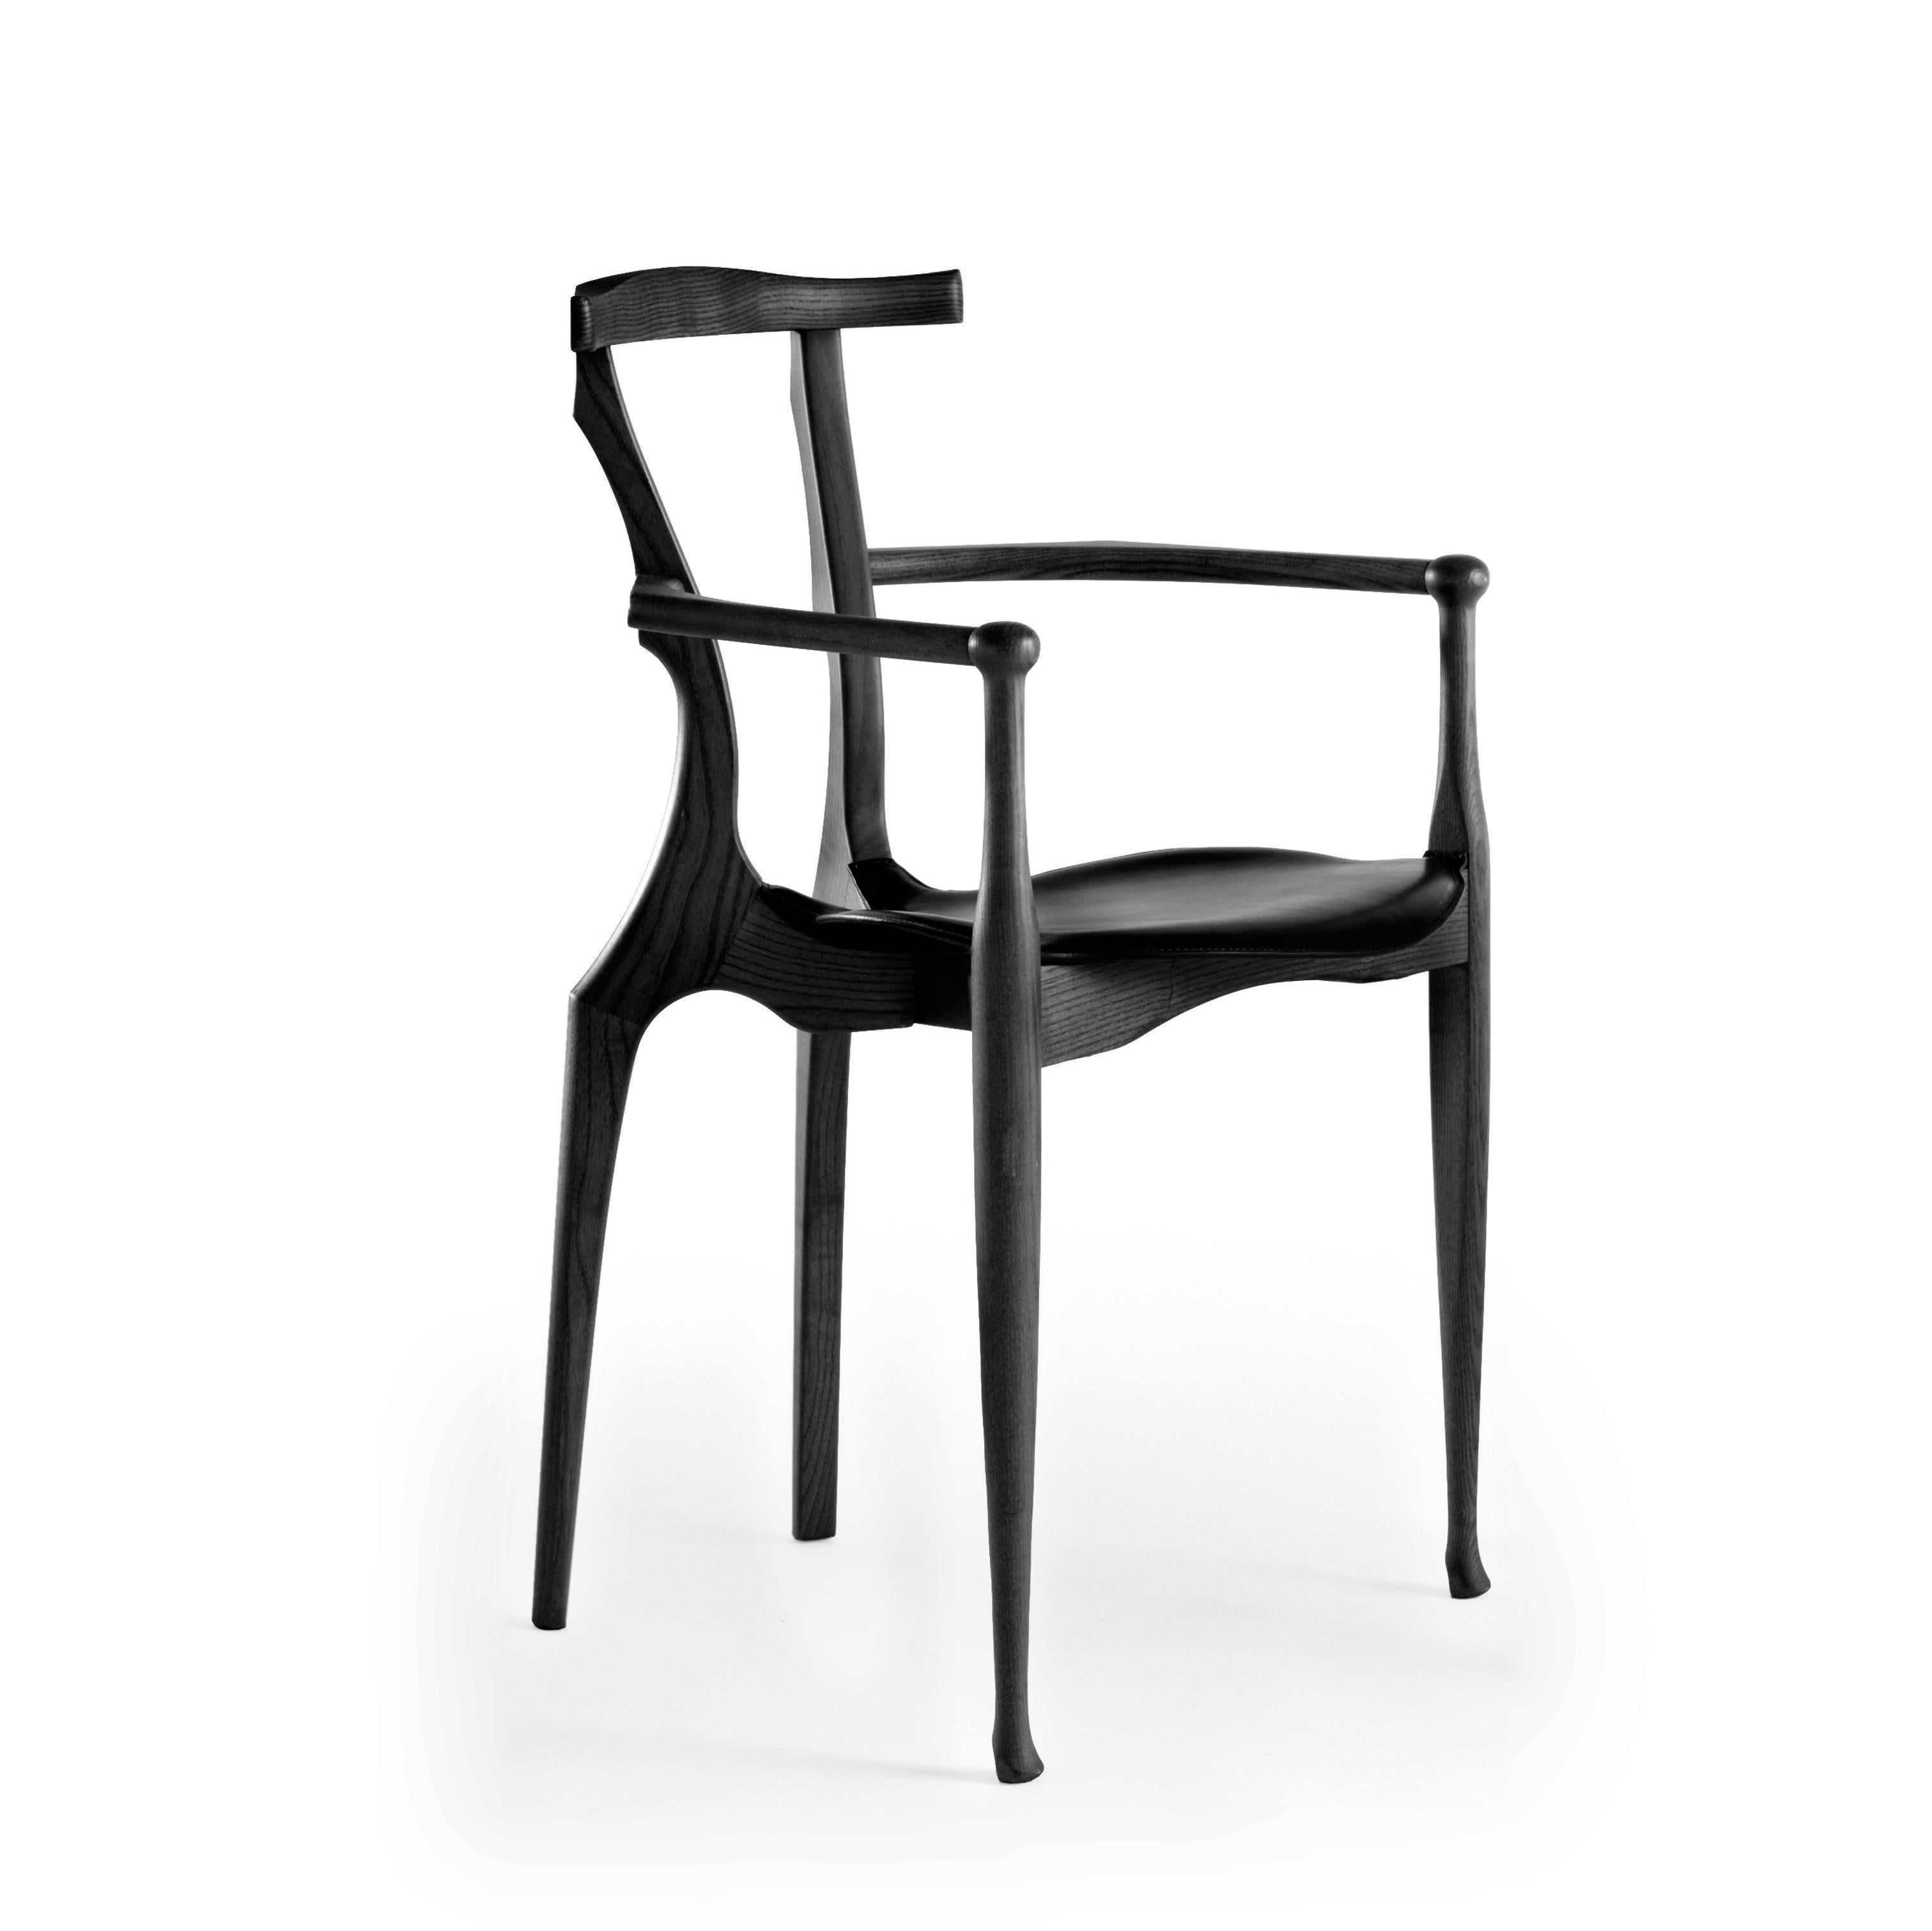 Solid ash lacquered in black with seat inn black hide
Set of four.

Gaulino chair designed by Oscar Tusquets manufactured by BD Barcelona Design, circa 2010.

Gaulino chair which, designed in 1987, was selected for the Industrial Design prize and